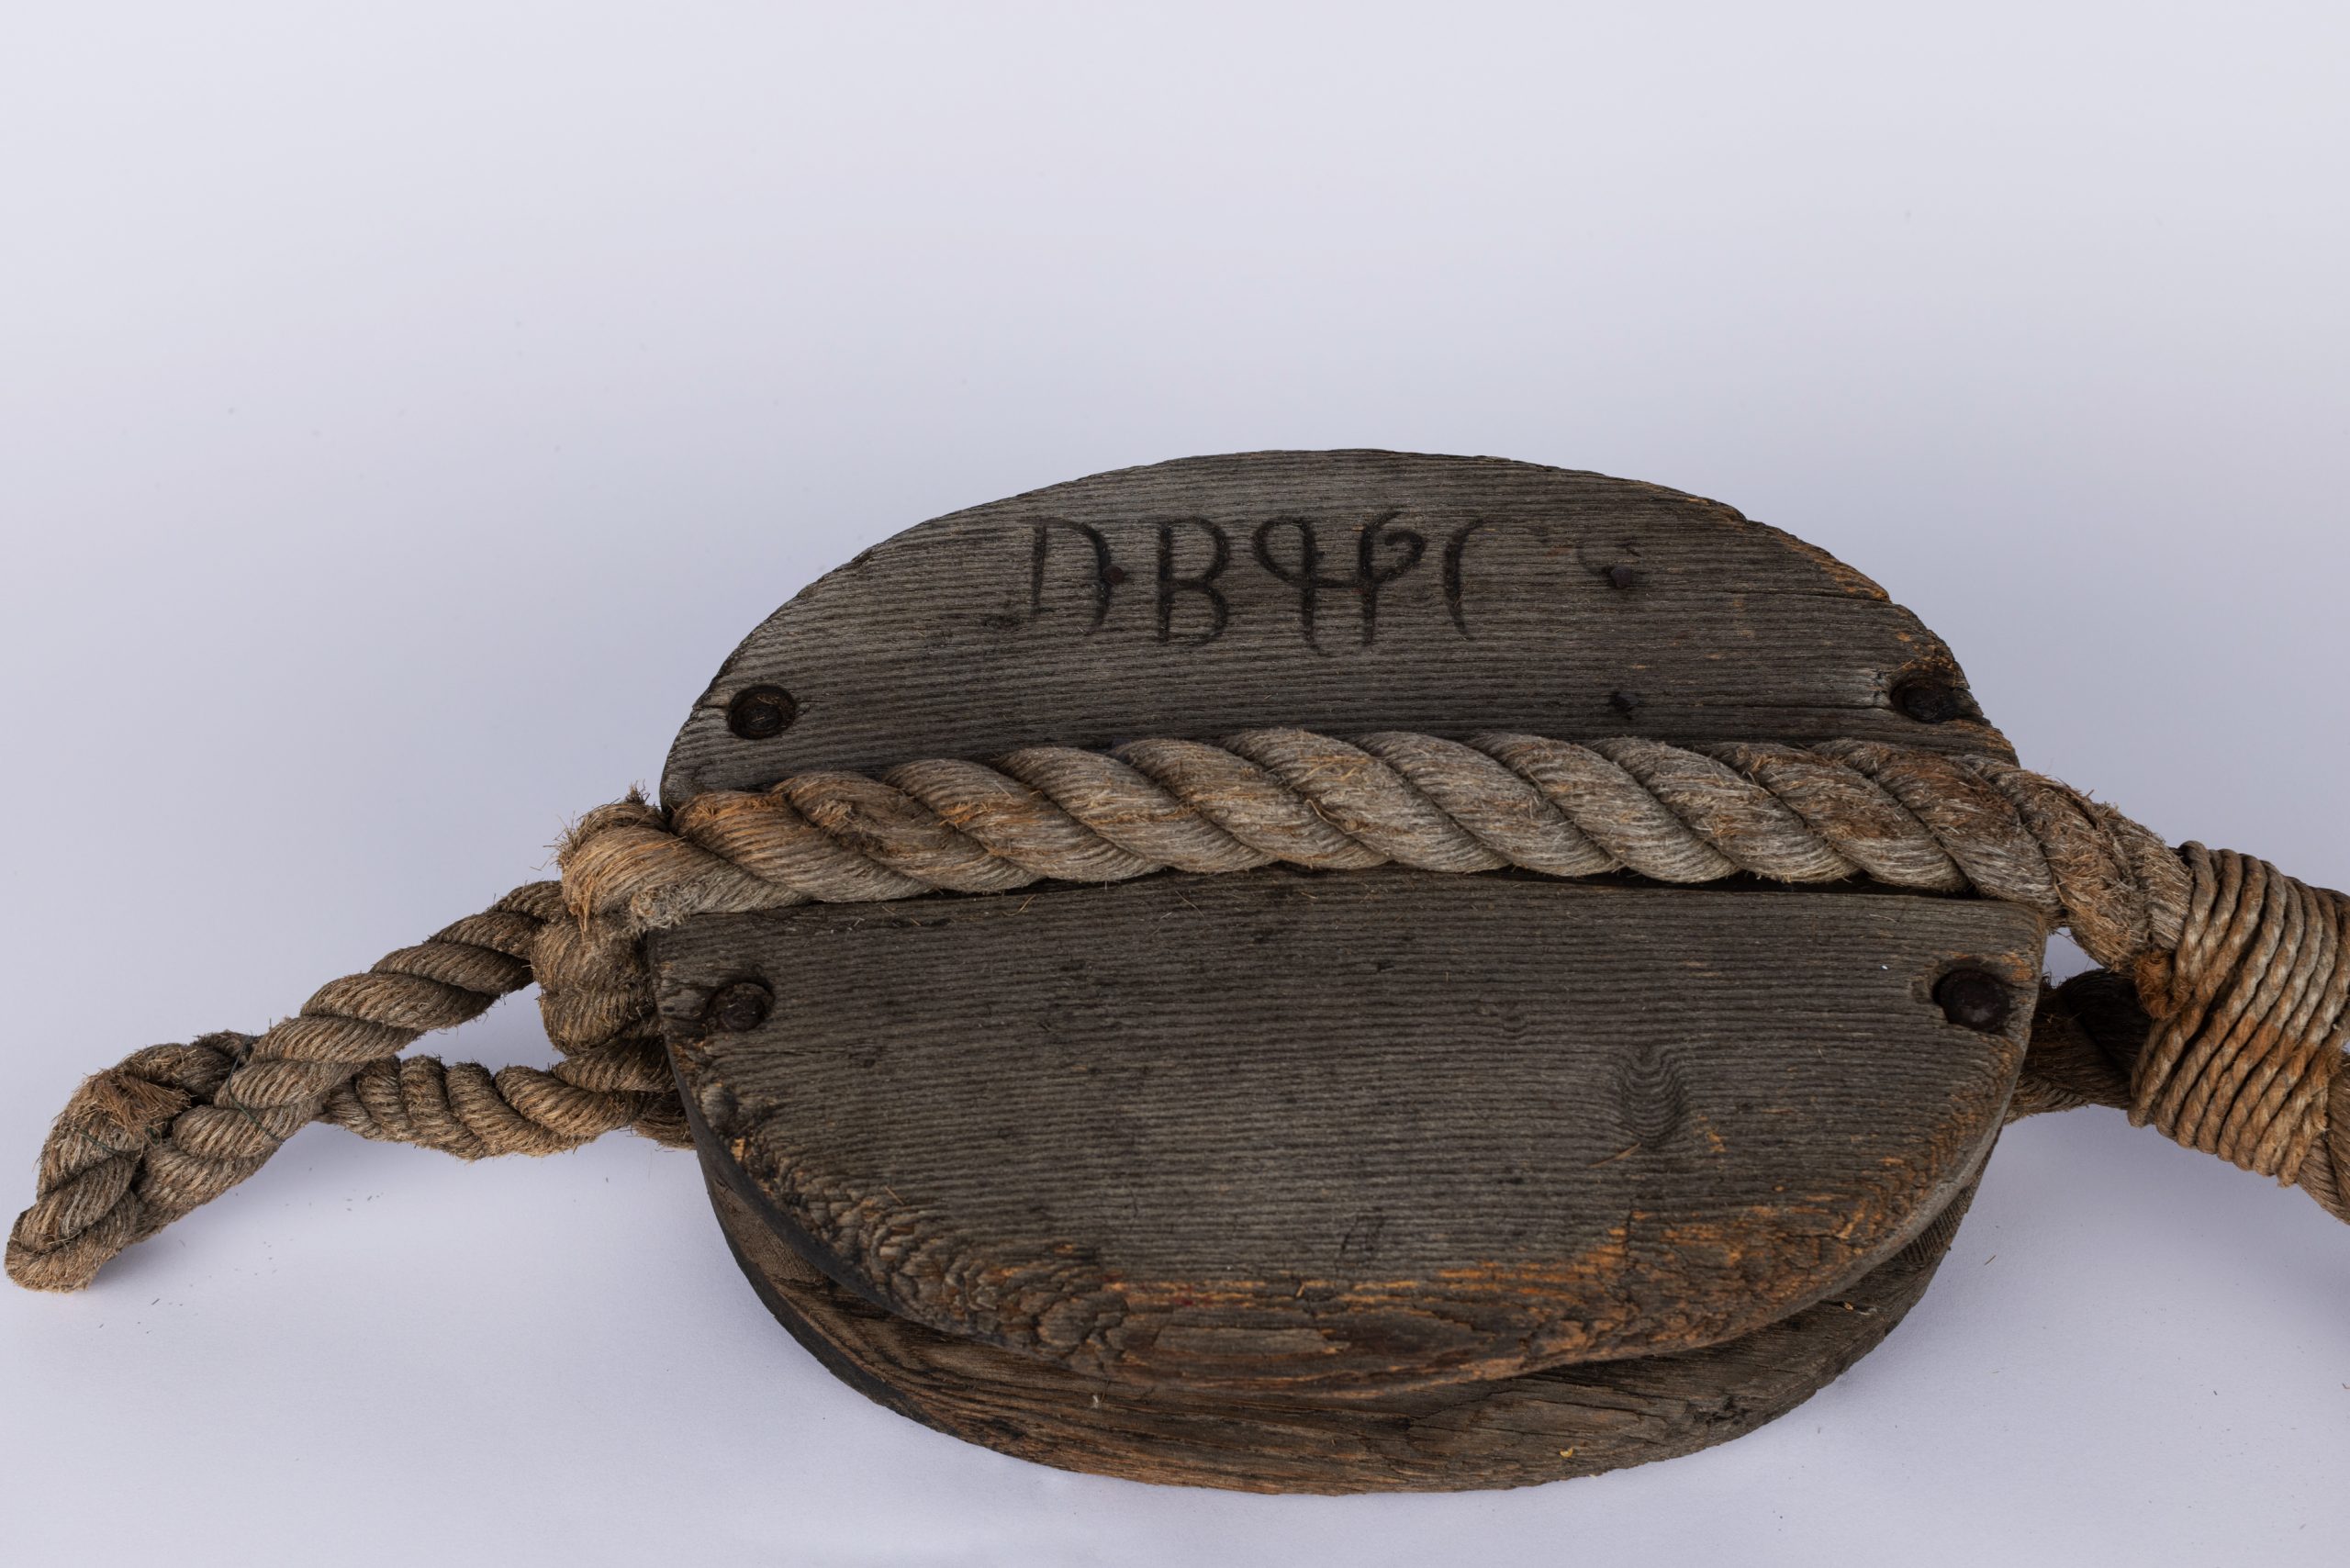 oval wooden block with a metal hook attached to one end, furthersecured by rope